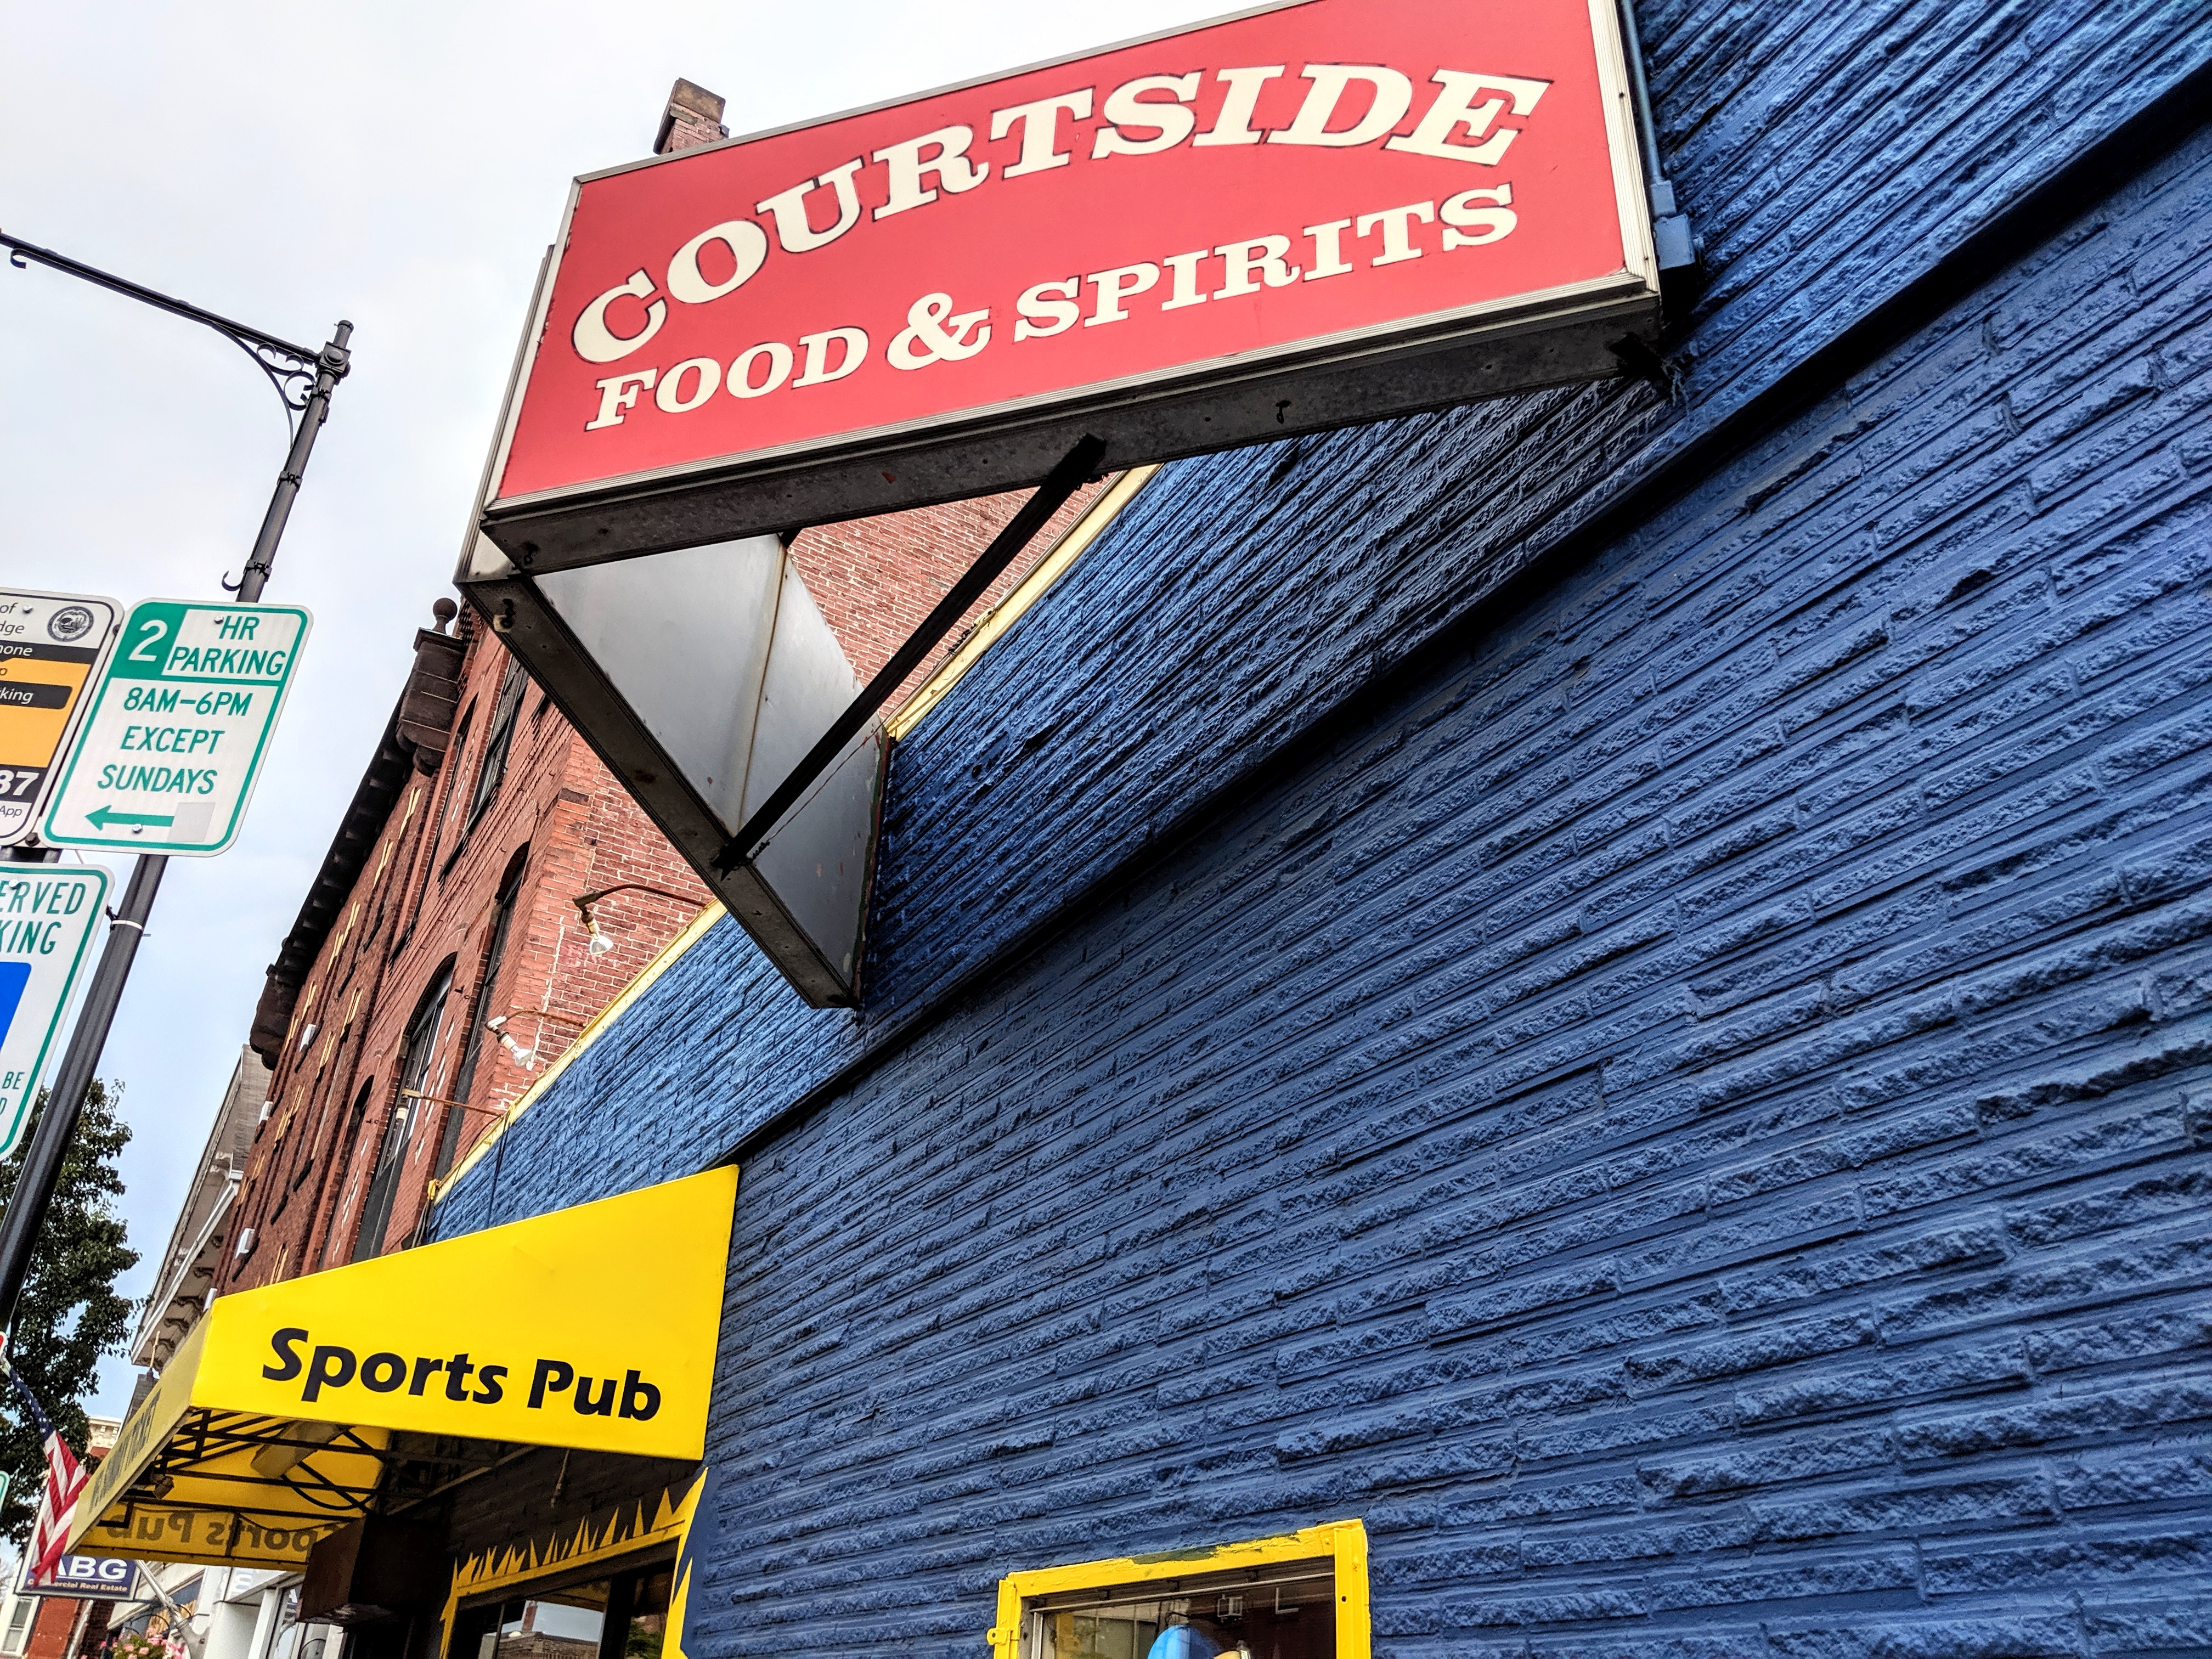 A blue-painted brick building with yellow awnings and a red sign that reads Courtside Food &amp; Spirits